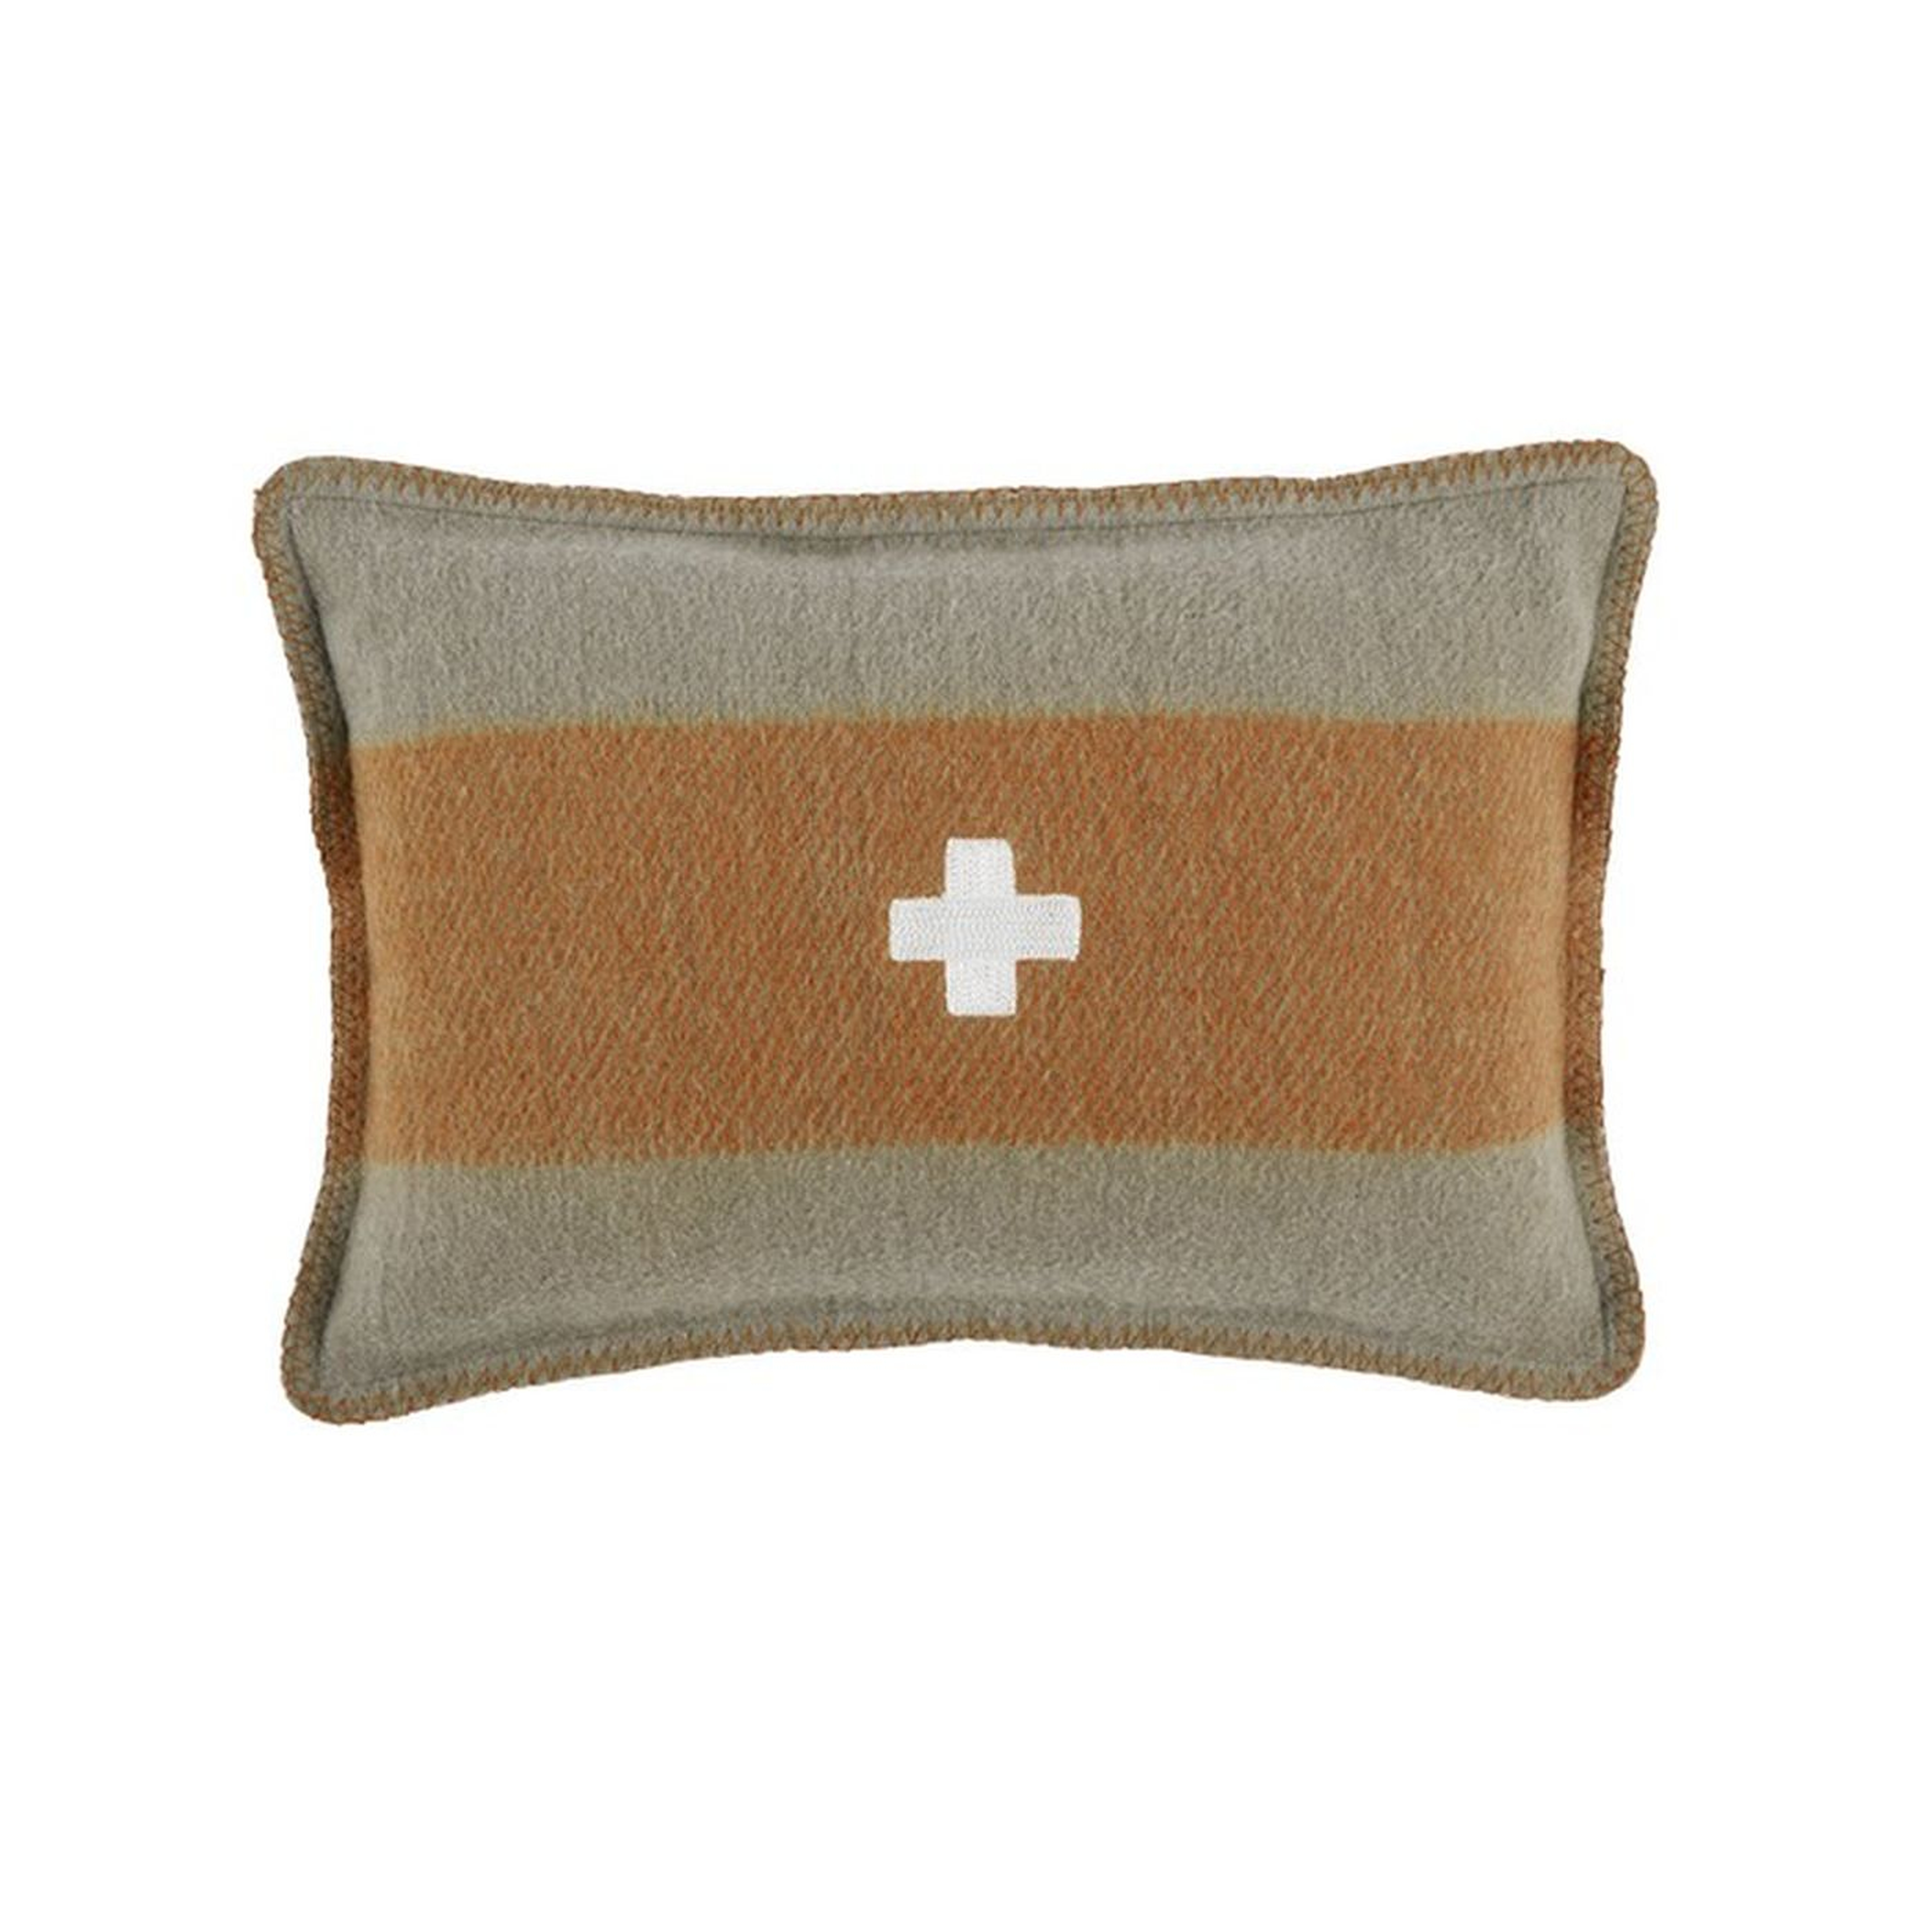 Swiss Army Wool Throw Pillow - Perigold